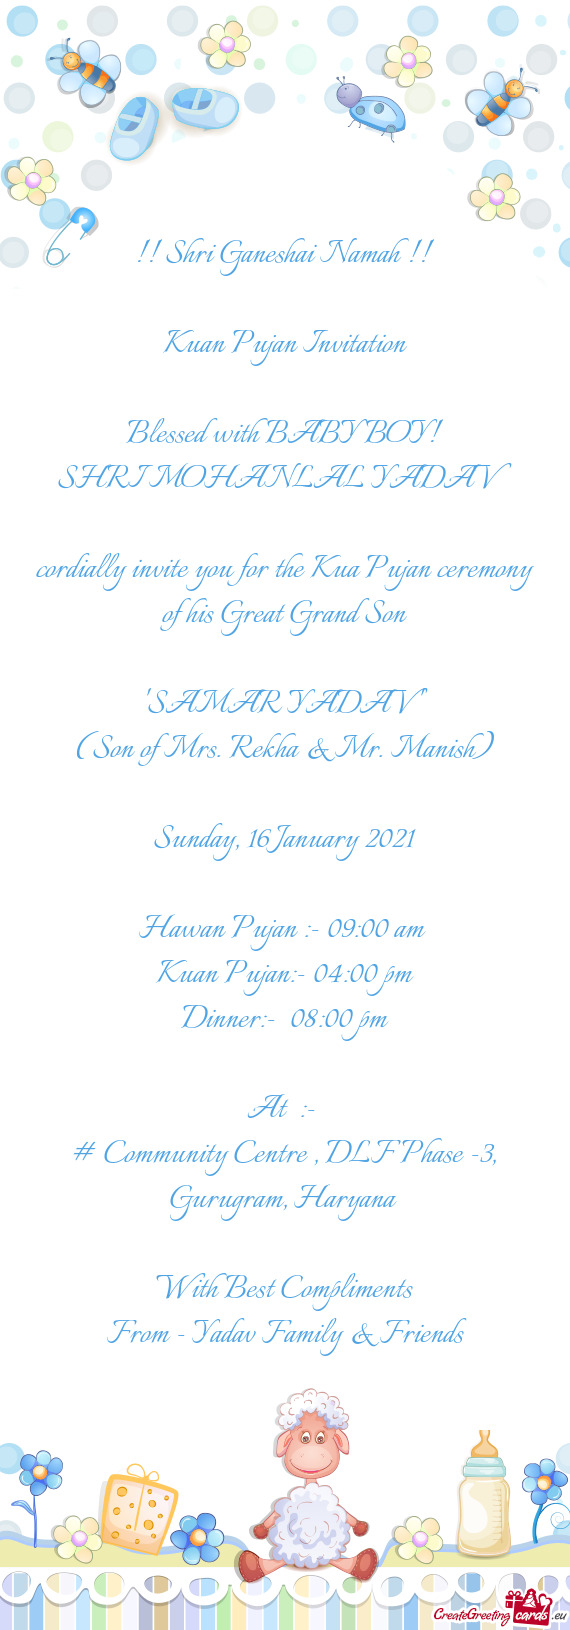 Cordially invite you for the Kua Pujan ceremony of his Great Grand Son